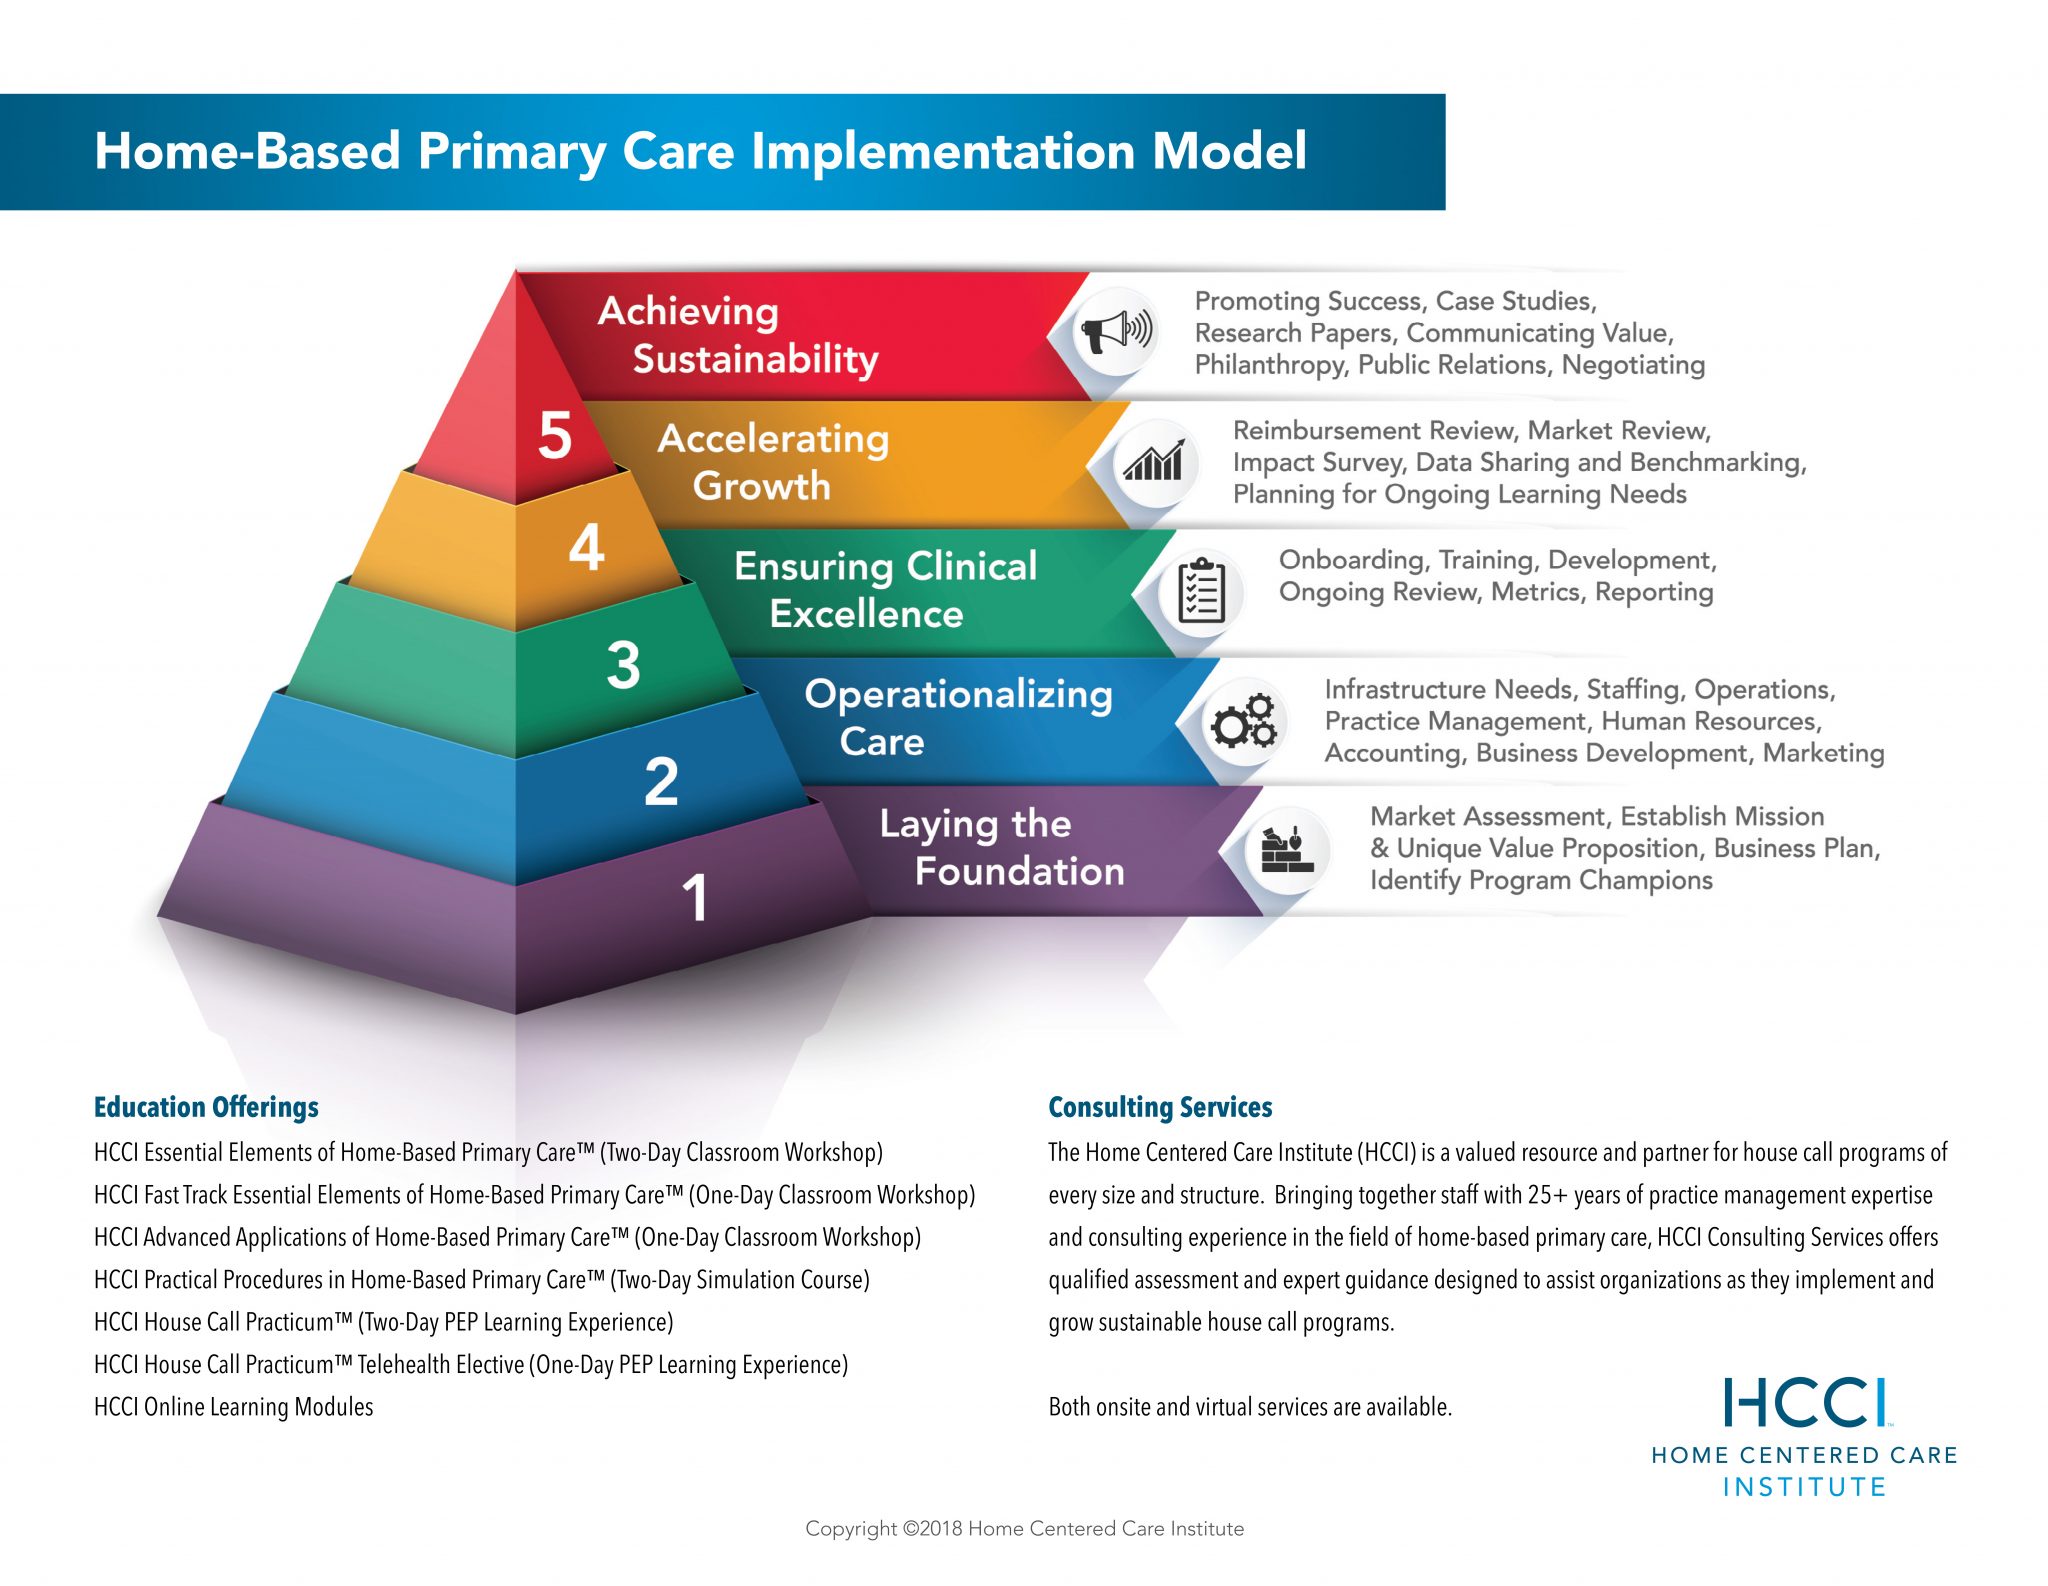 The Hcci Home Based Primary Care Implementation Model Home Centered